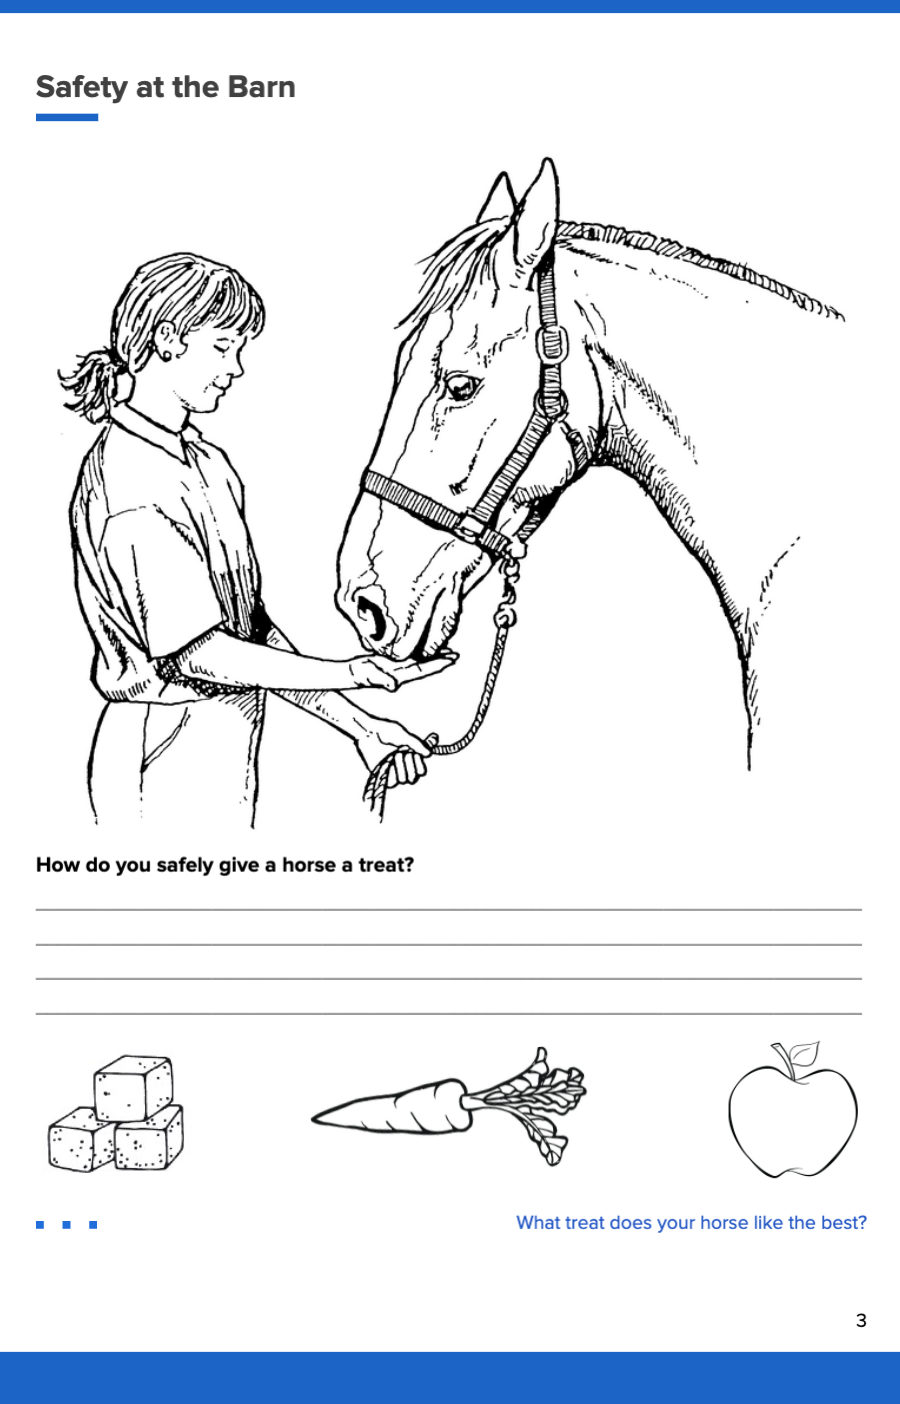 Worksheet – Safety  White Oak Stables Intended For Parts Of The Horse Worksheet